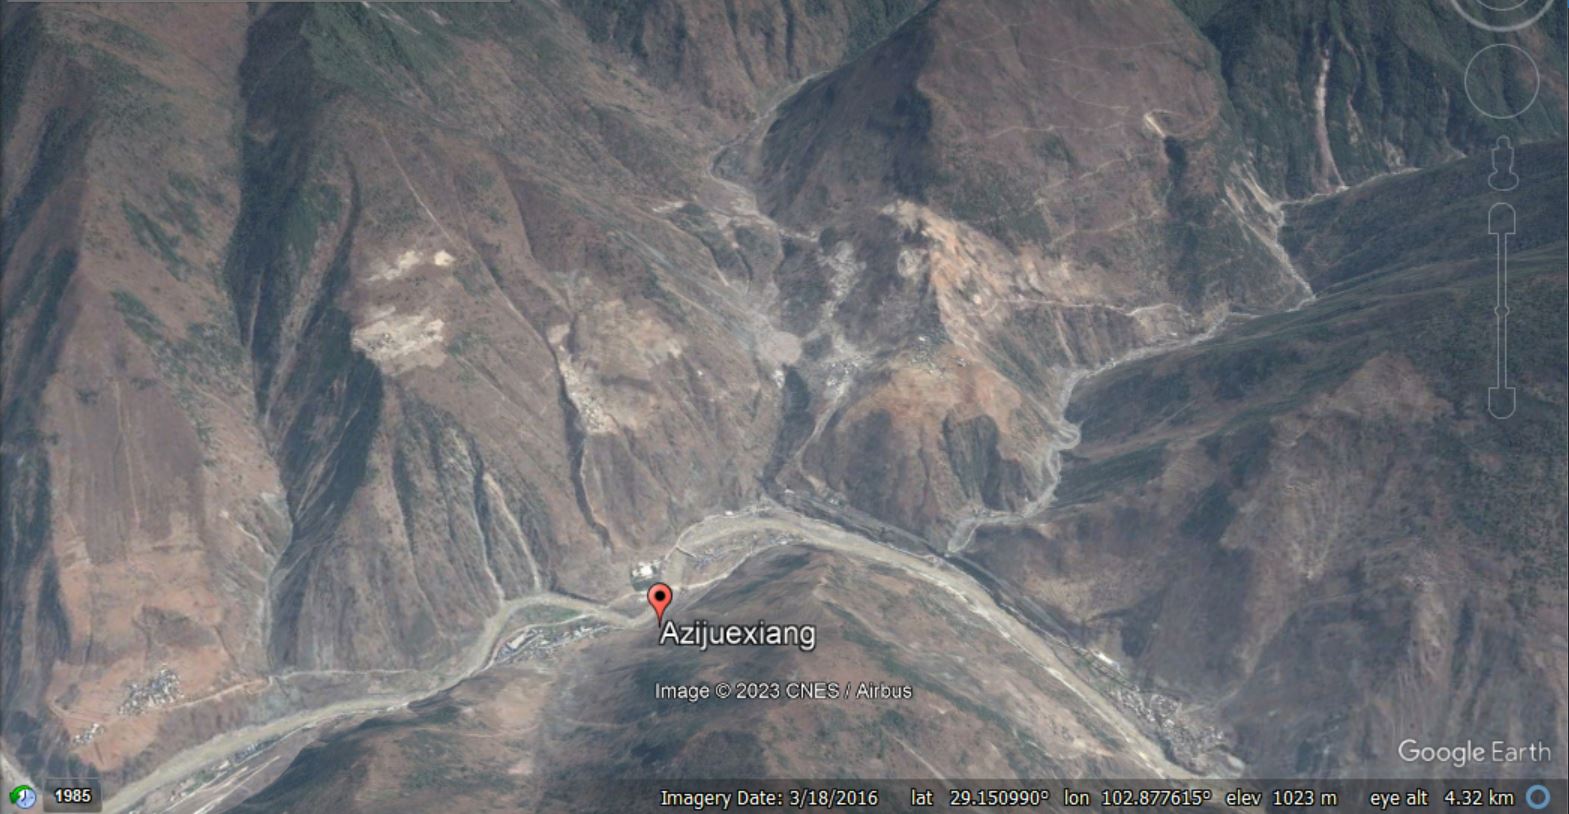 Google Earth image of the location of the Azijue debris flow, collected in March 2016.